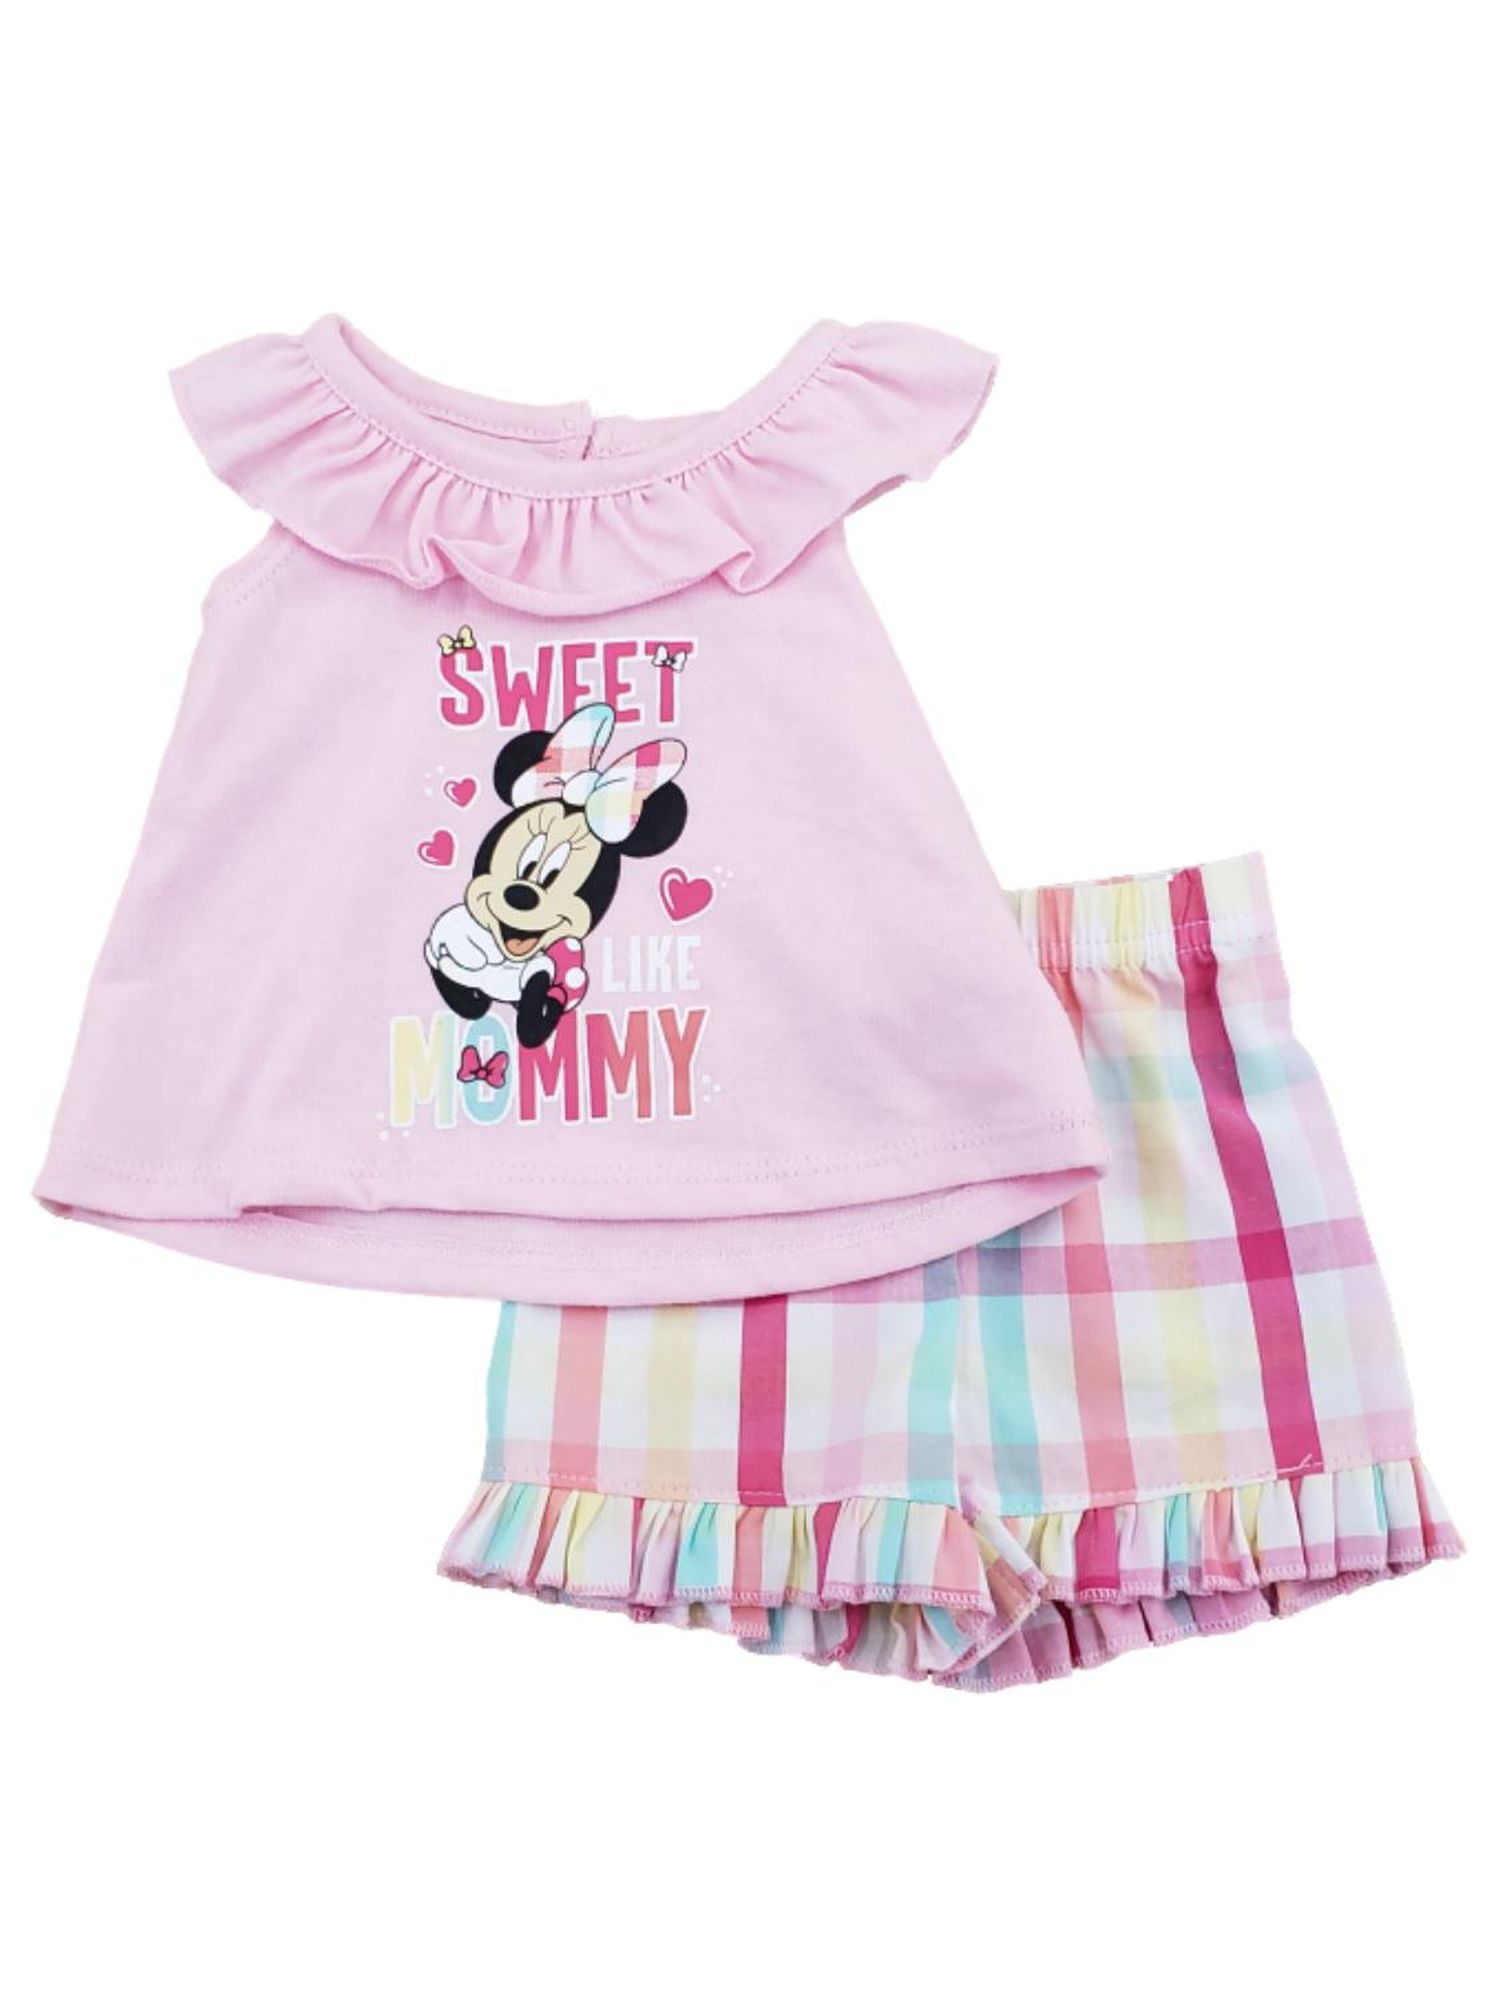 Disney Infant Girls Pink Minnie Mouse Outfit Ruffled Shirt & Shorts Set NB